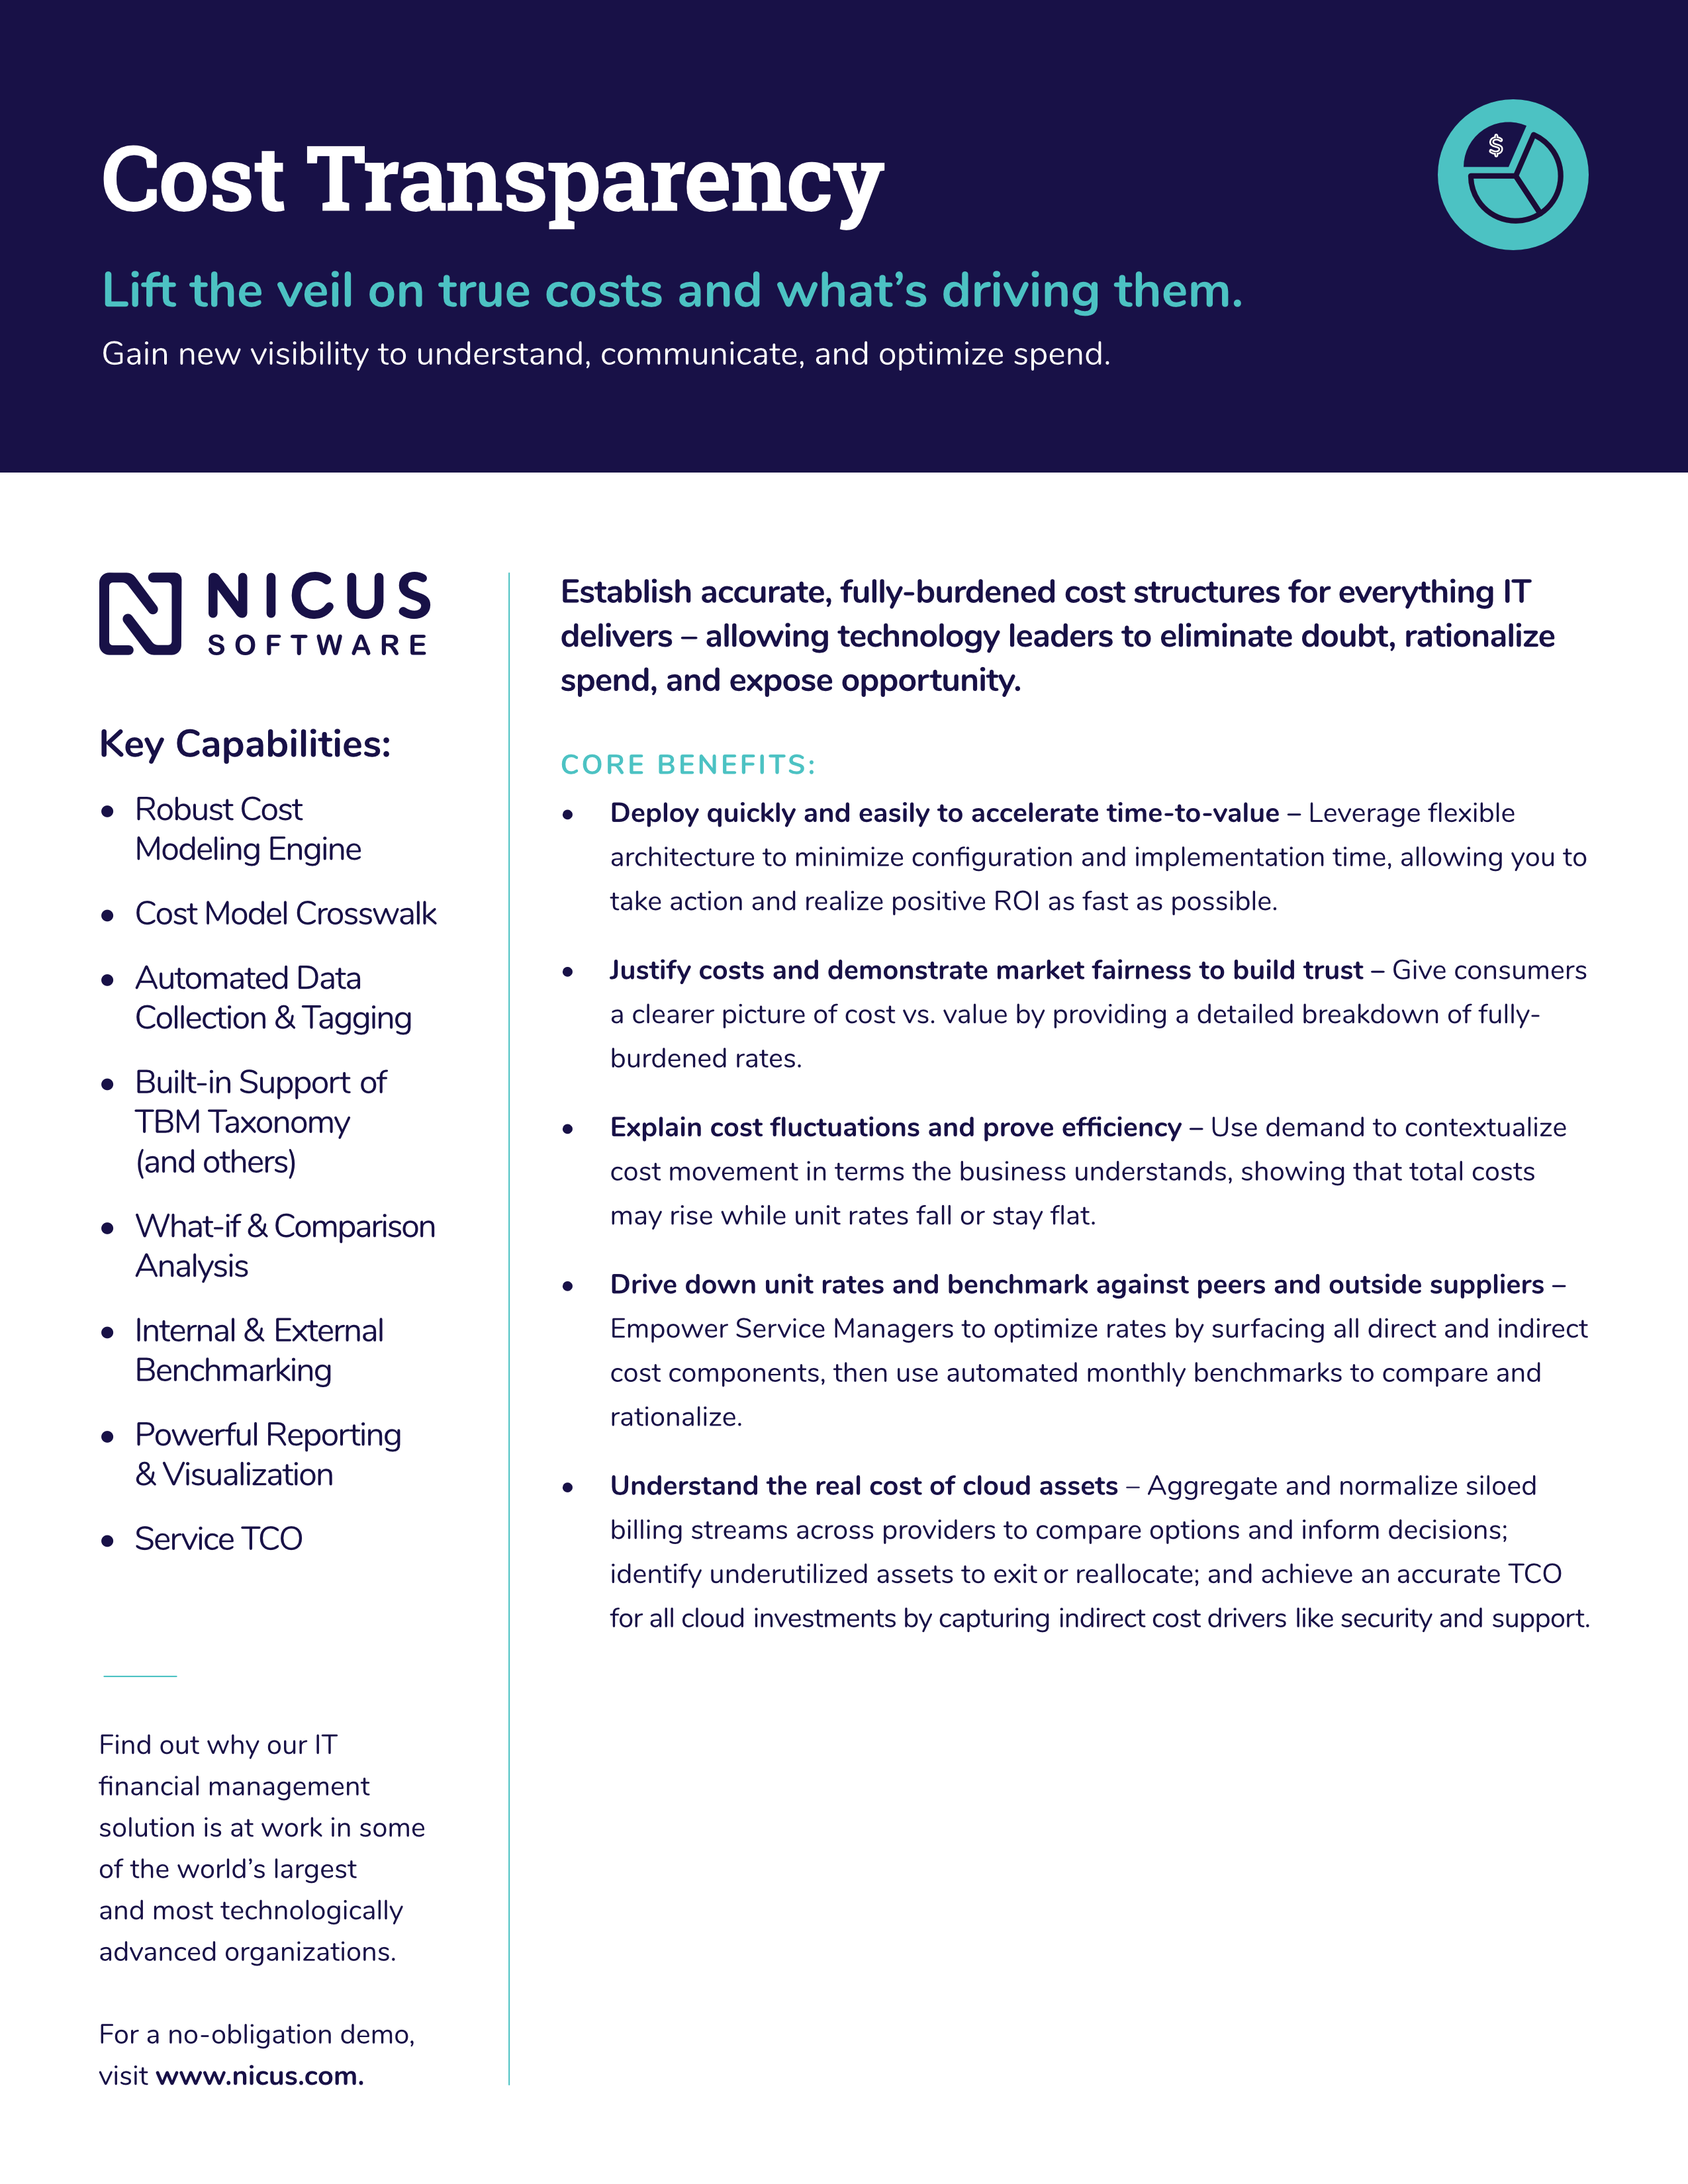 Nicus Cost Transparency